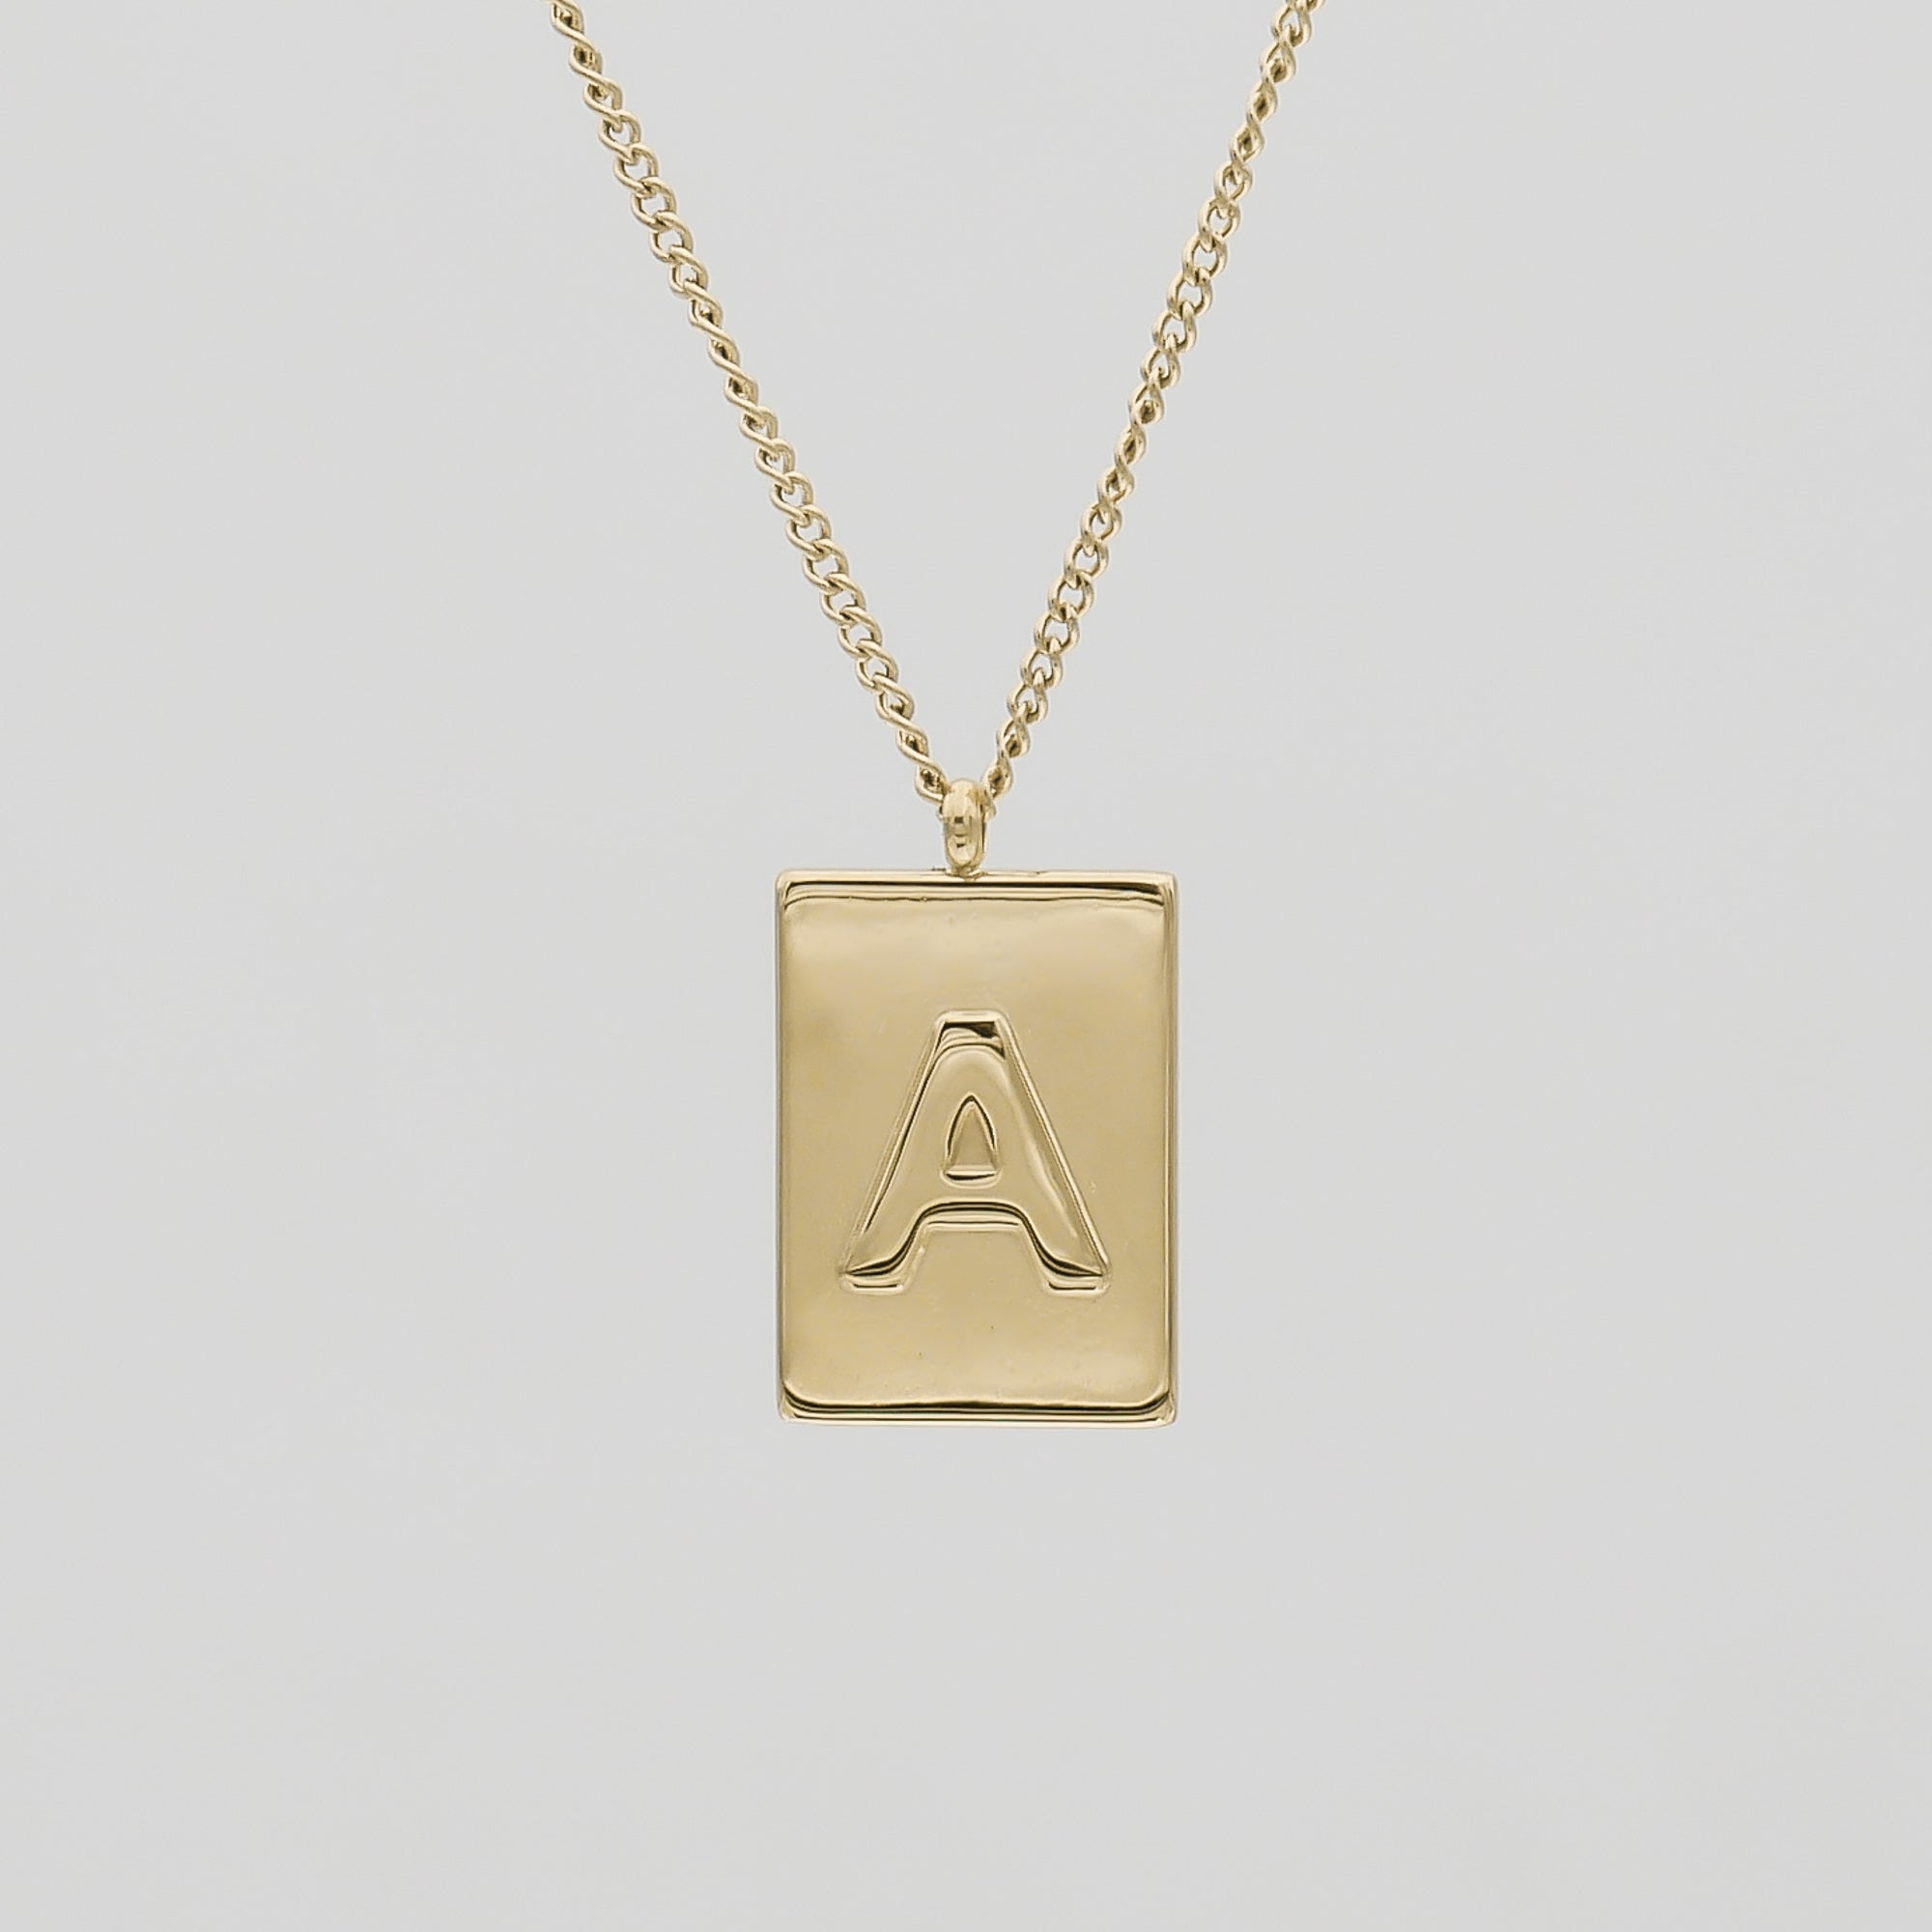 Athena custom initial Gold pendant Necklace, letter A by PRYA